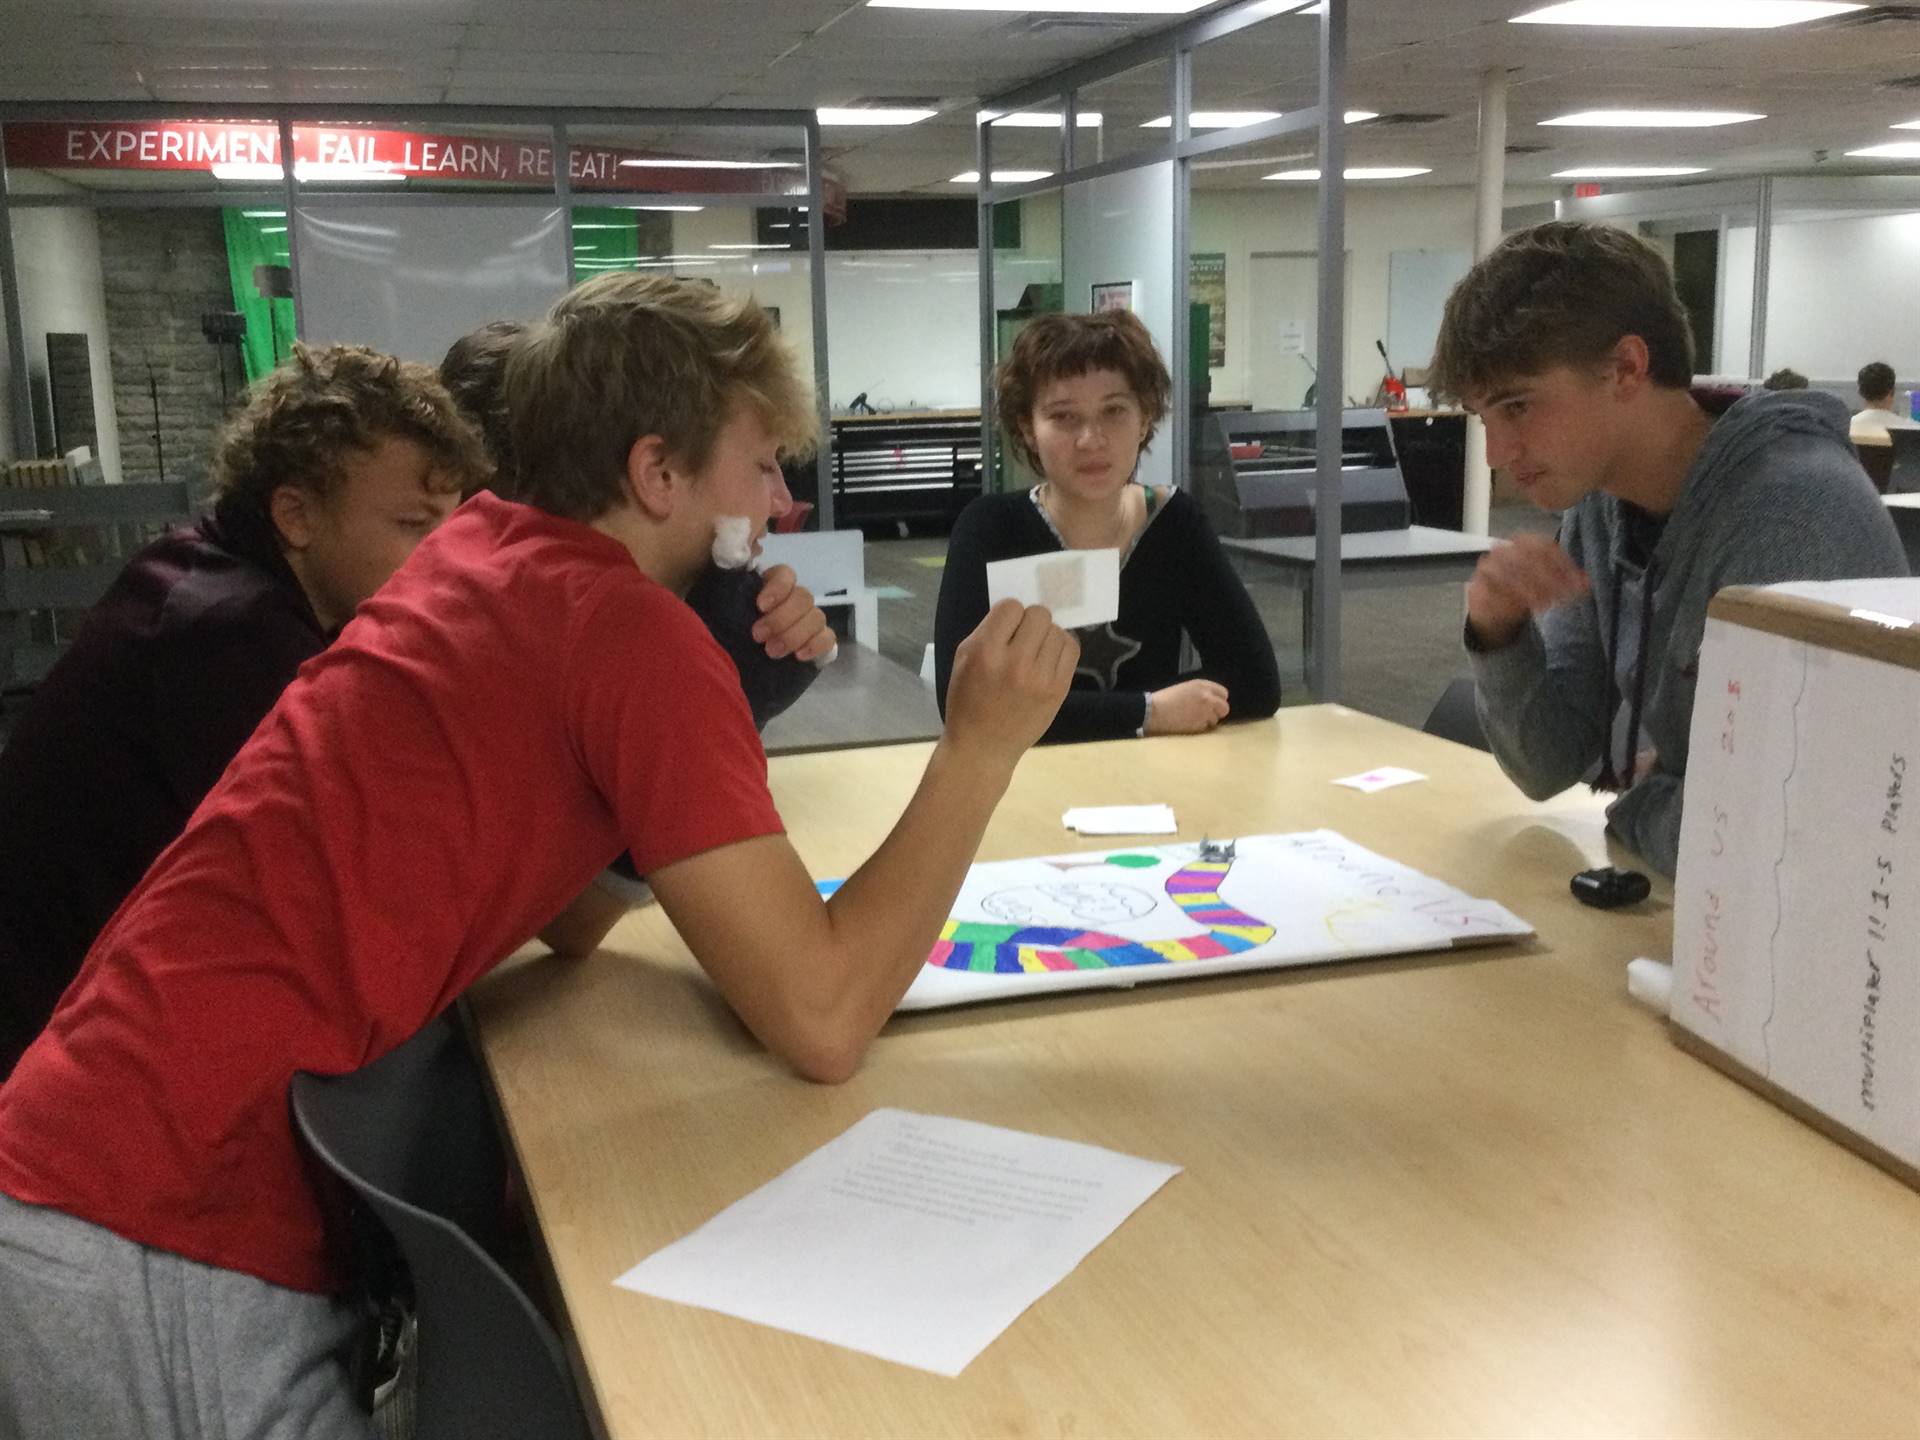 Students paying a board game of their own creation